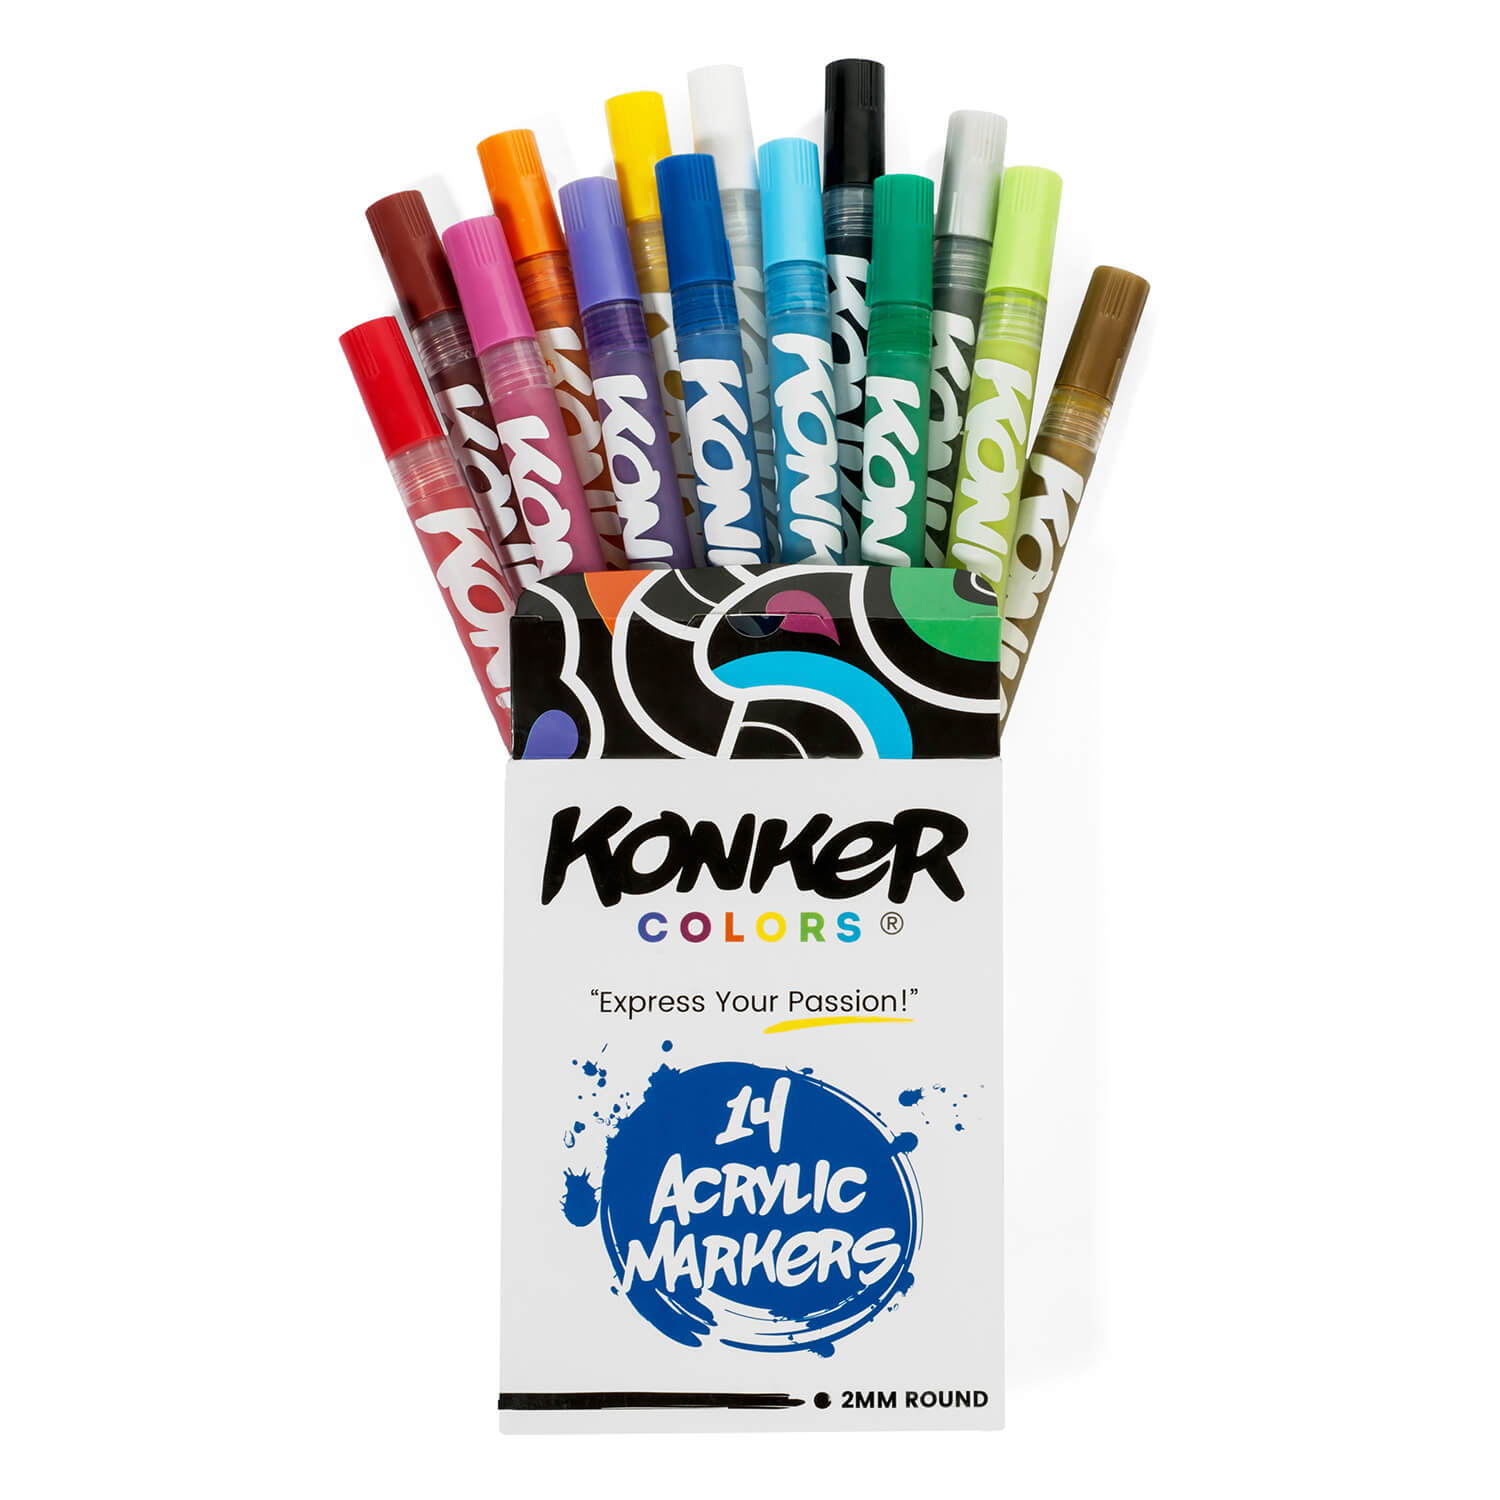 Konker Colors Acrylic Paint Markers